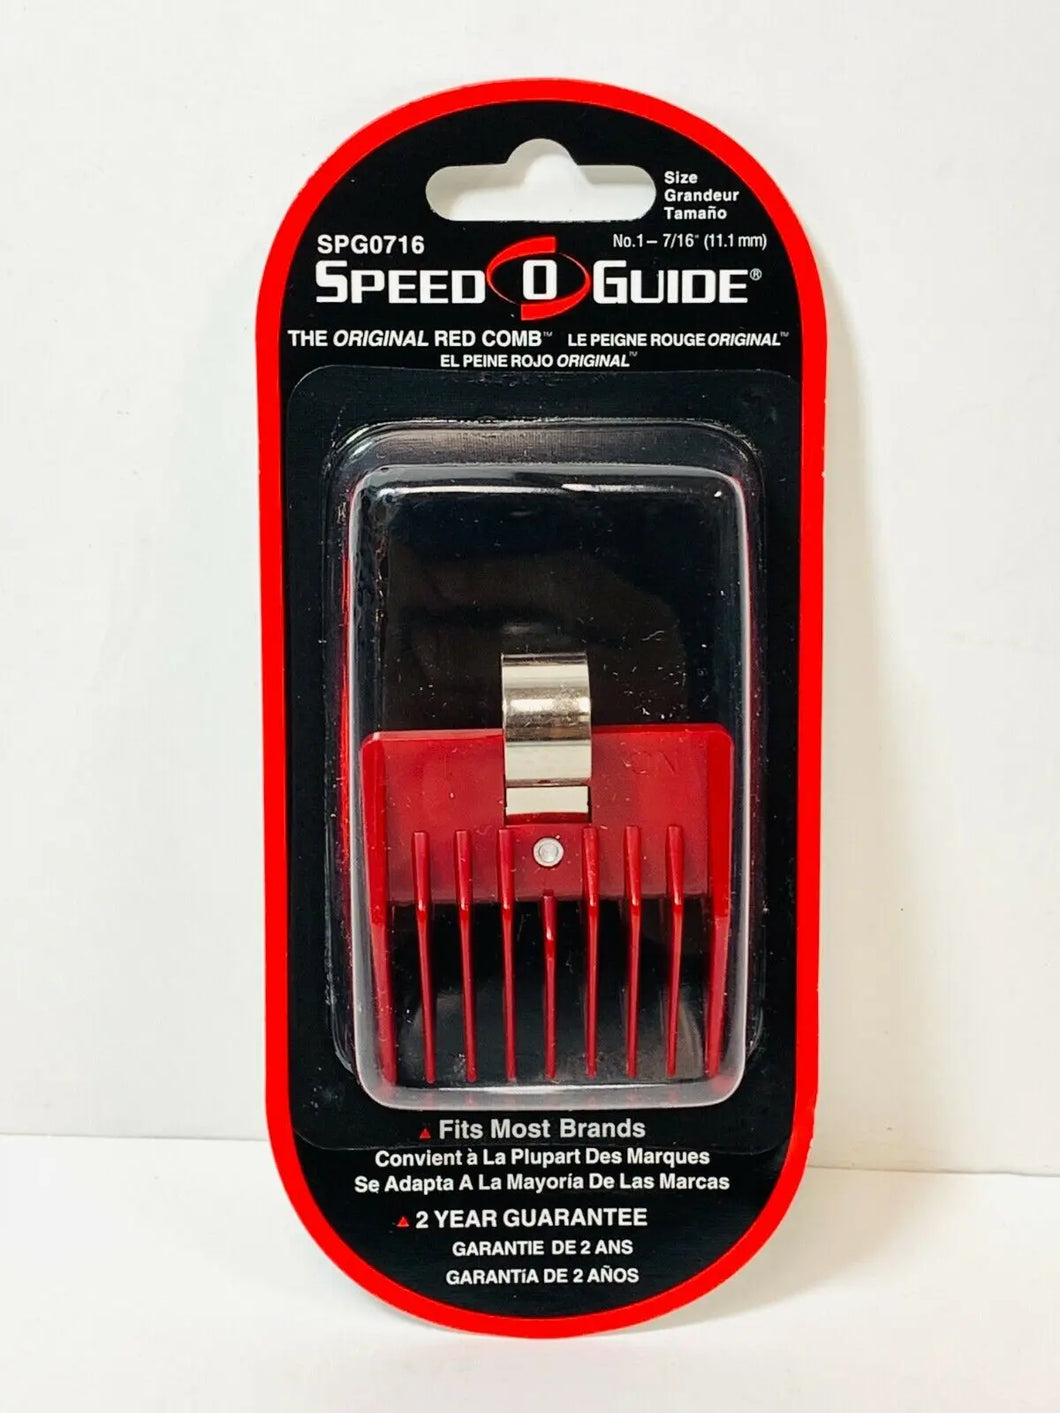 SPEED-O-GUIDE COMB SIZE #1 7/16